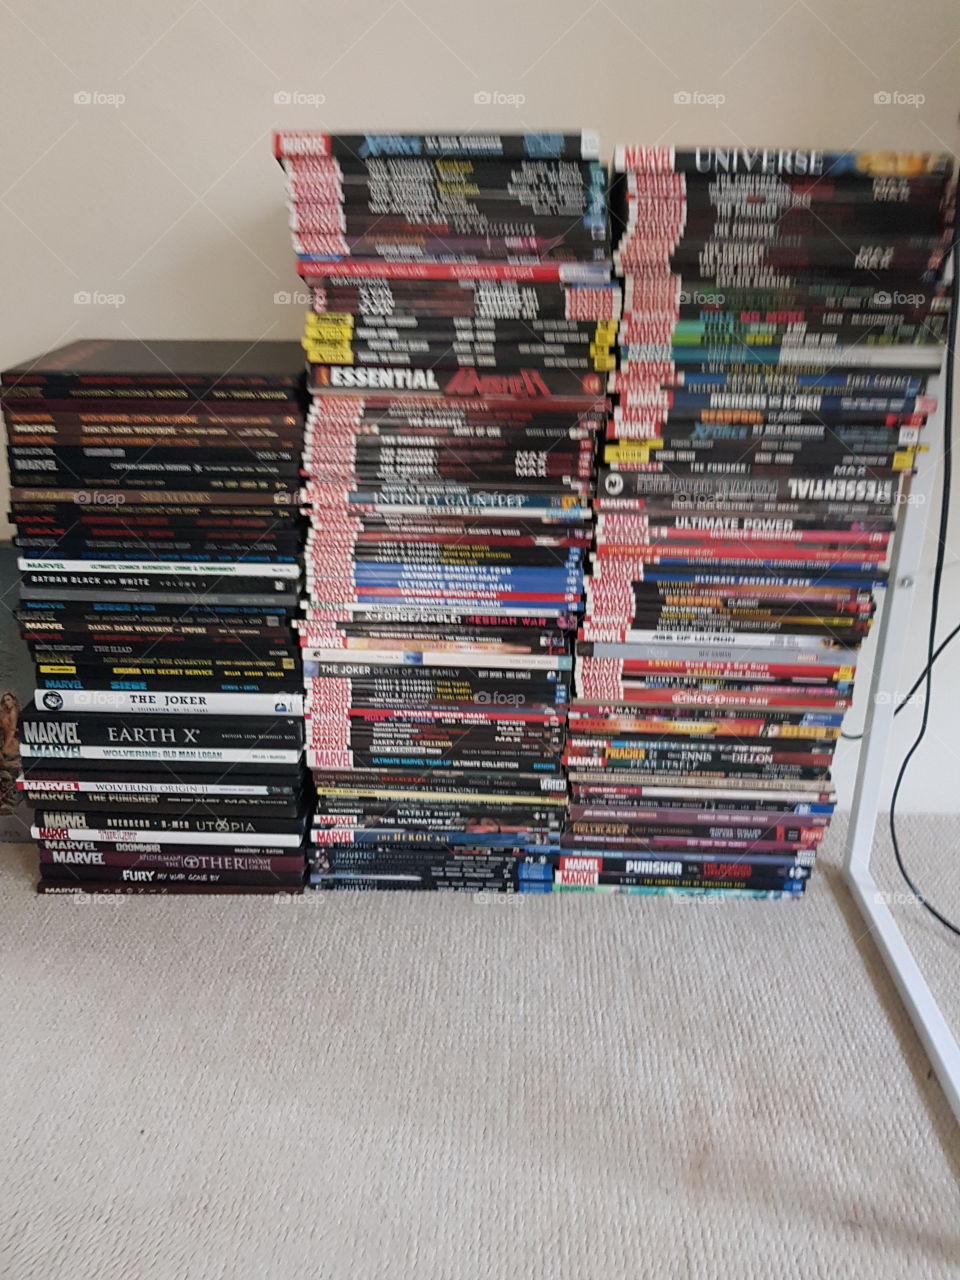 Bit of my collection